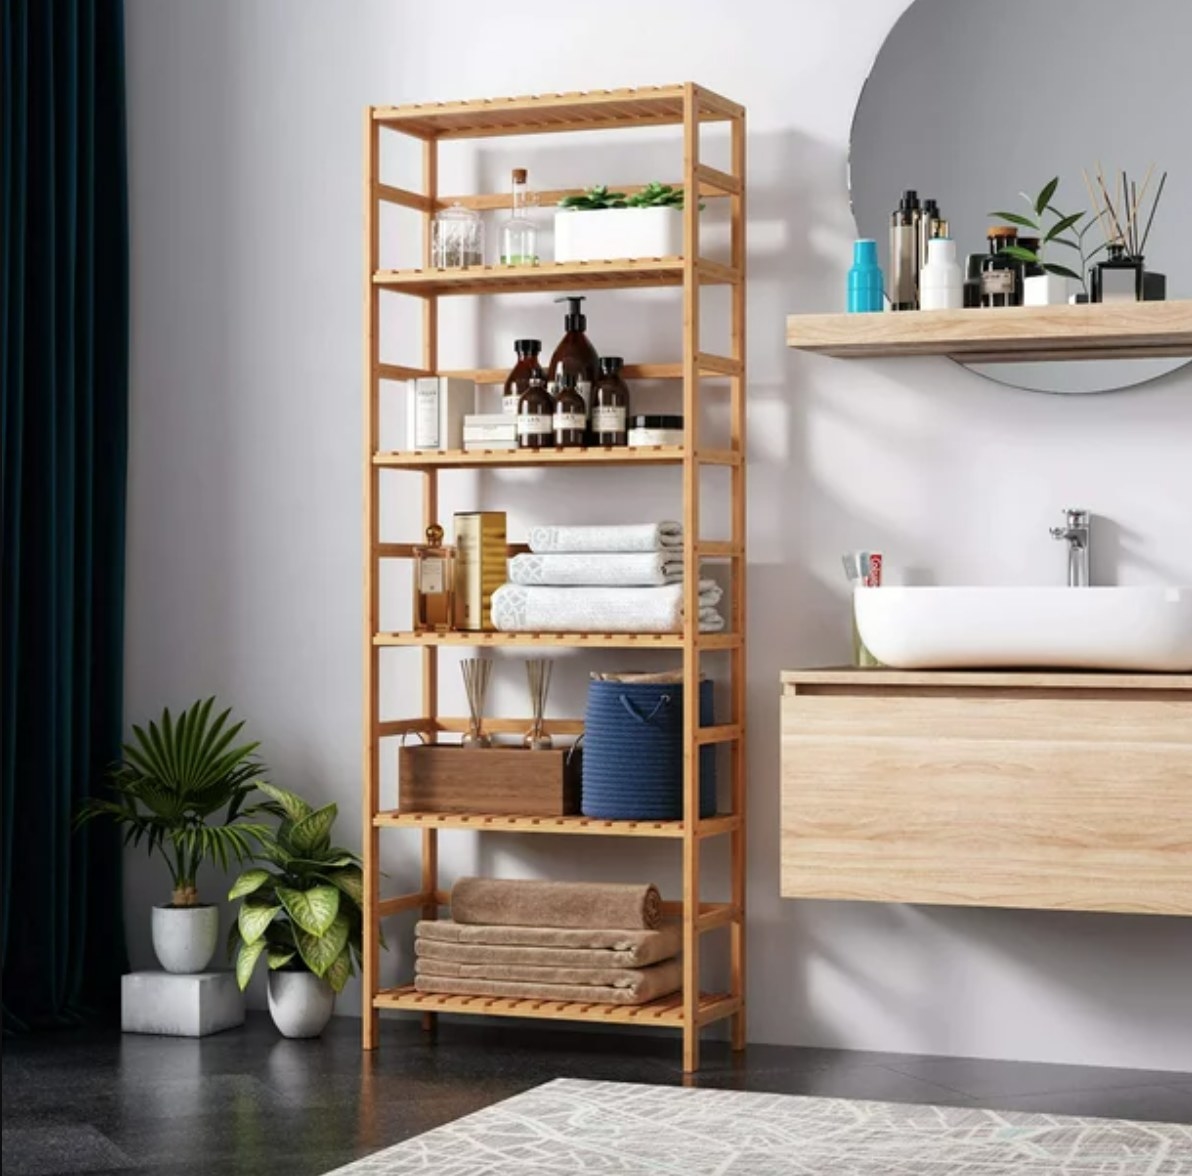 a bamboo shelf with bathroom supplies and towel organized on it in a bathroom